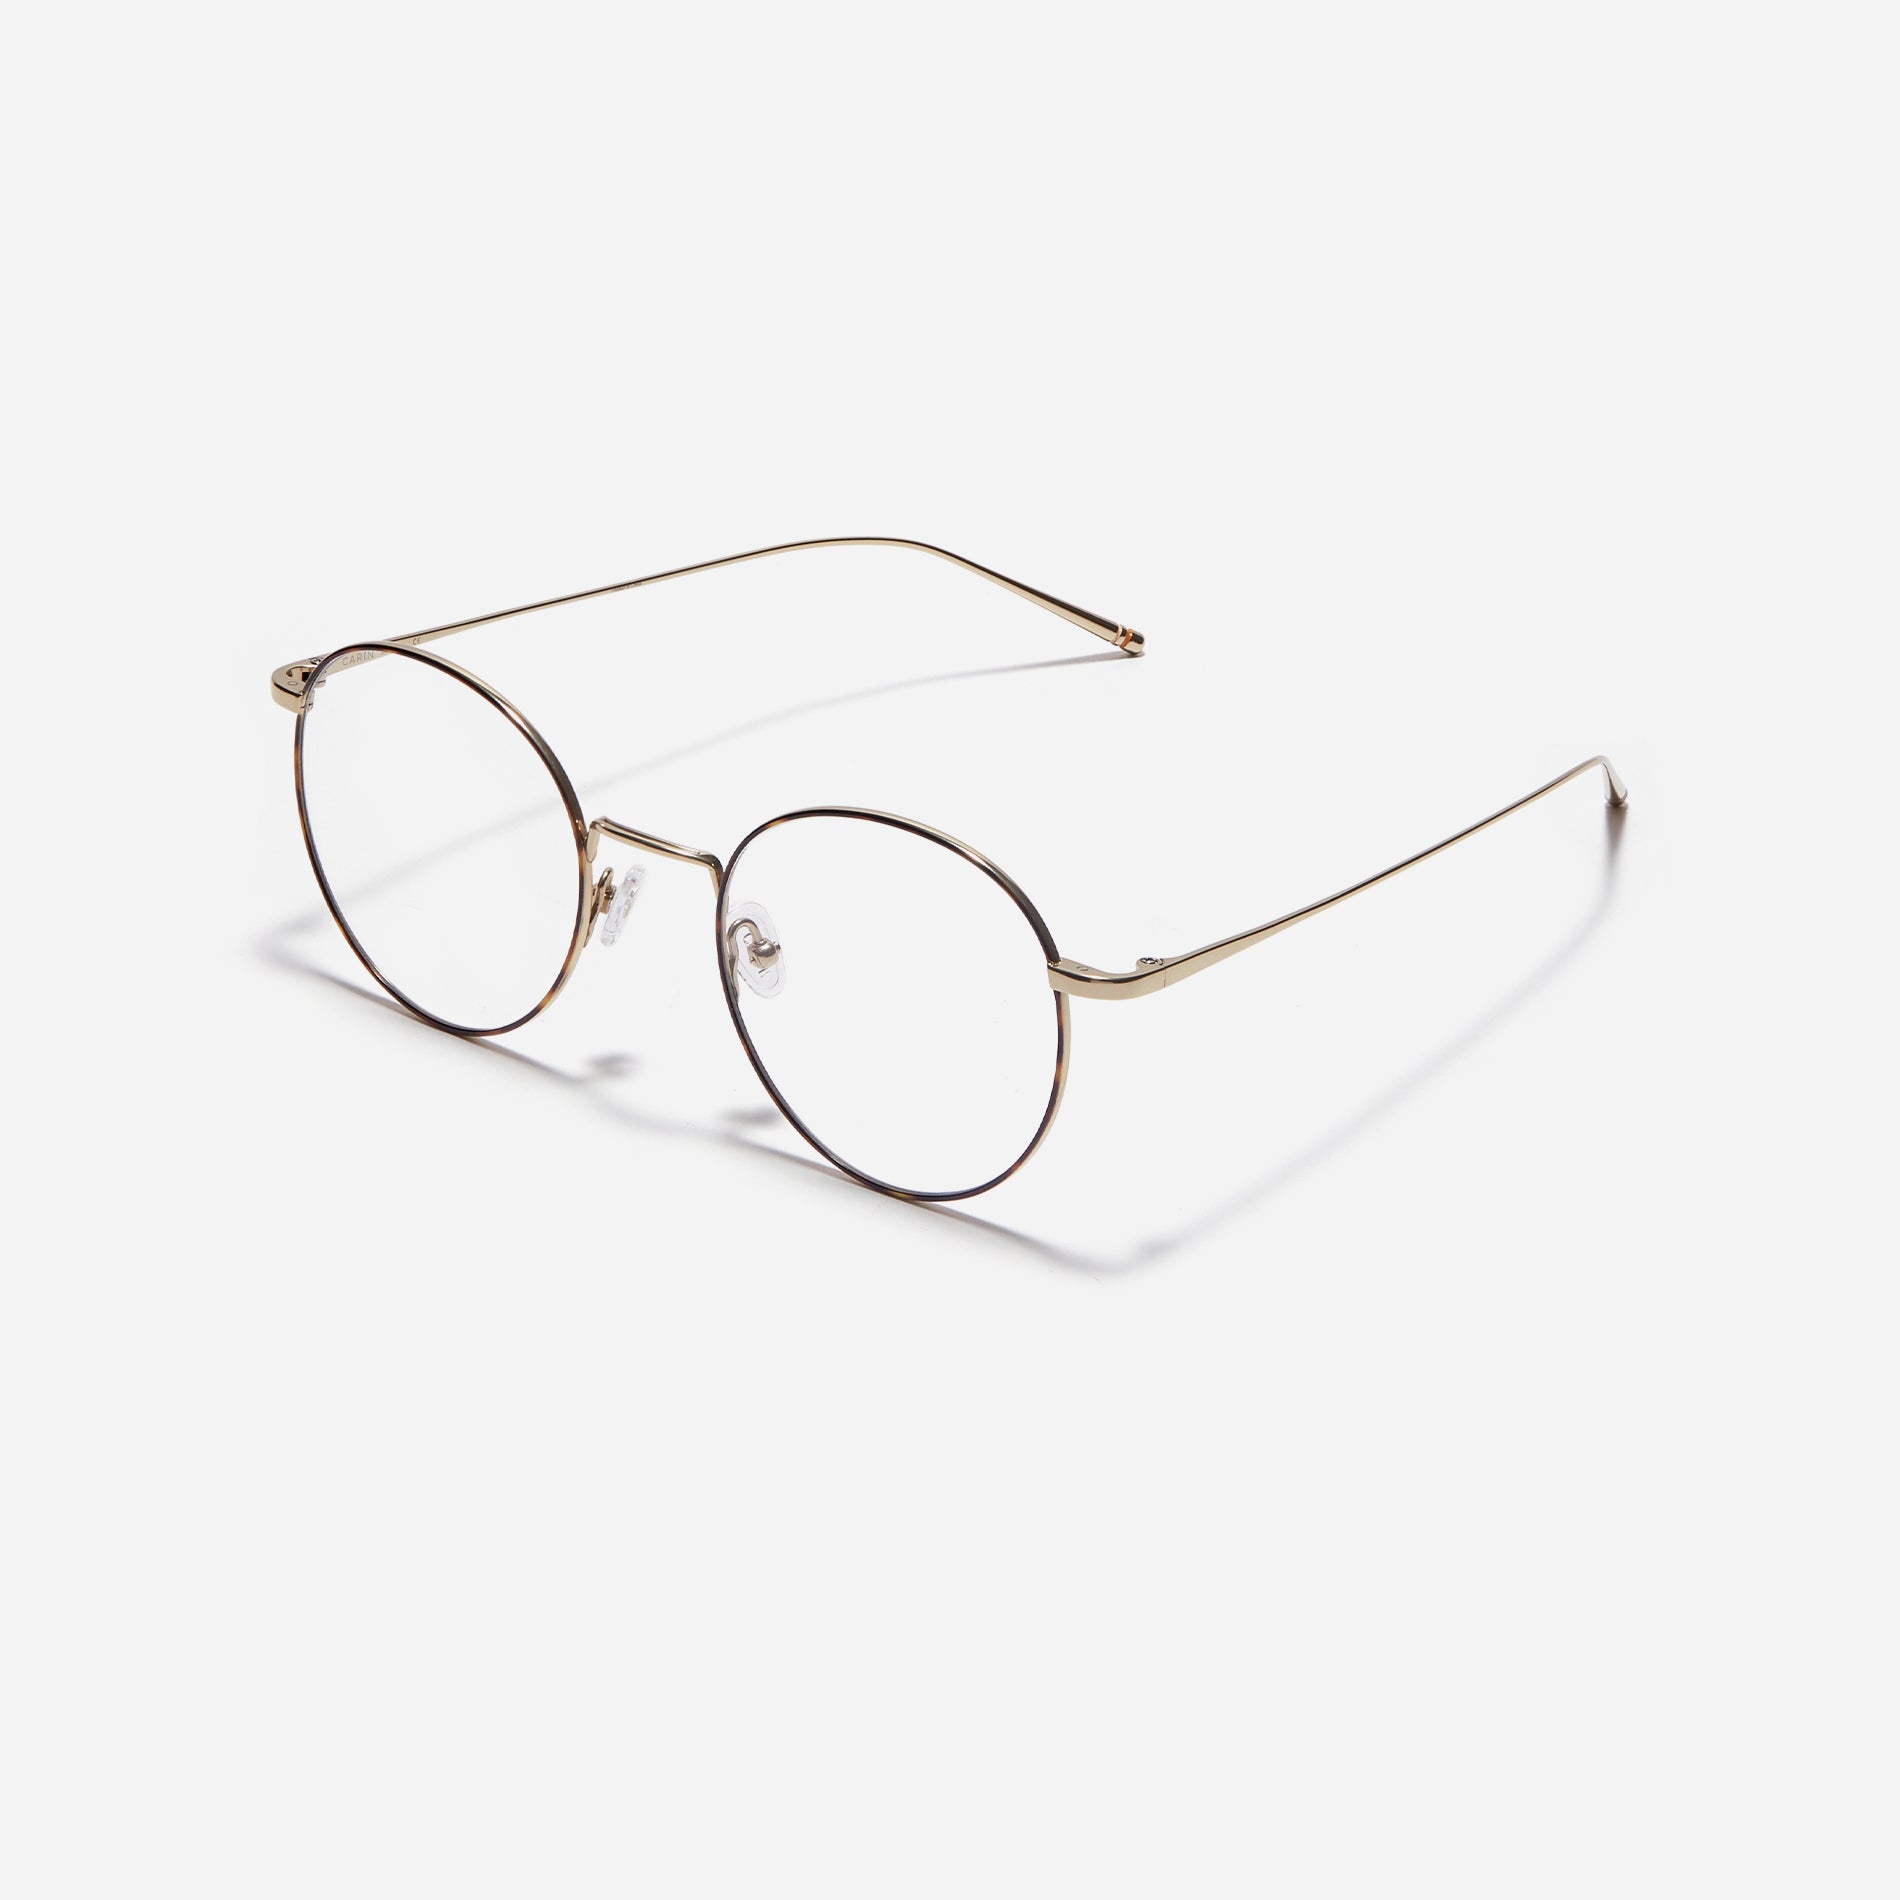 Round-shaped eyeglasses that naturally complement all face shapes. Crafted entirely from titanium, the frame provides exceptional durability and featherweight comfort, while its design adds a touch of casual charm to one's daily style.